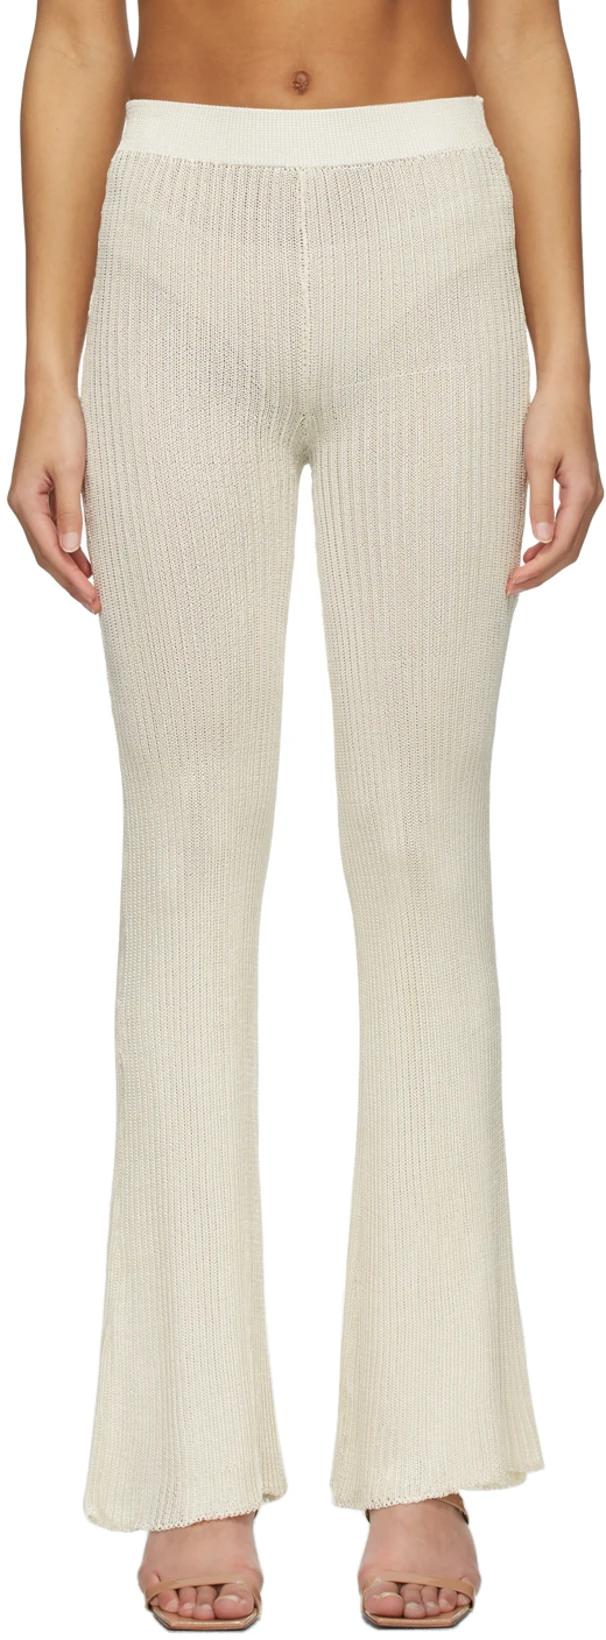 Off-White Ribbed Lounge Pants by CALLE DEL MAR